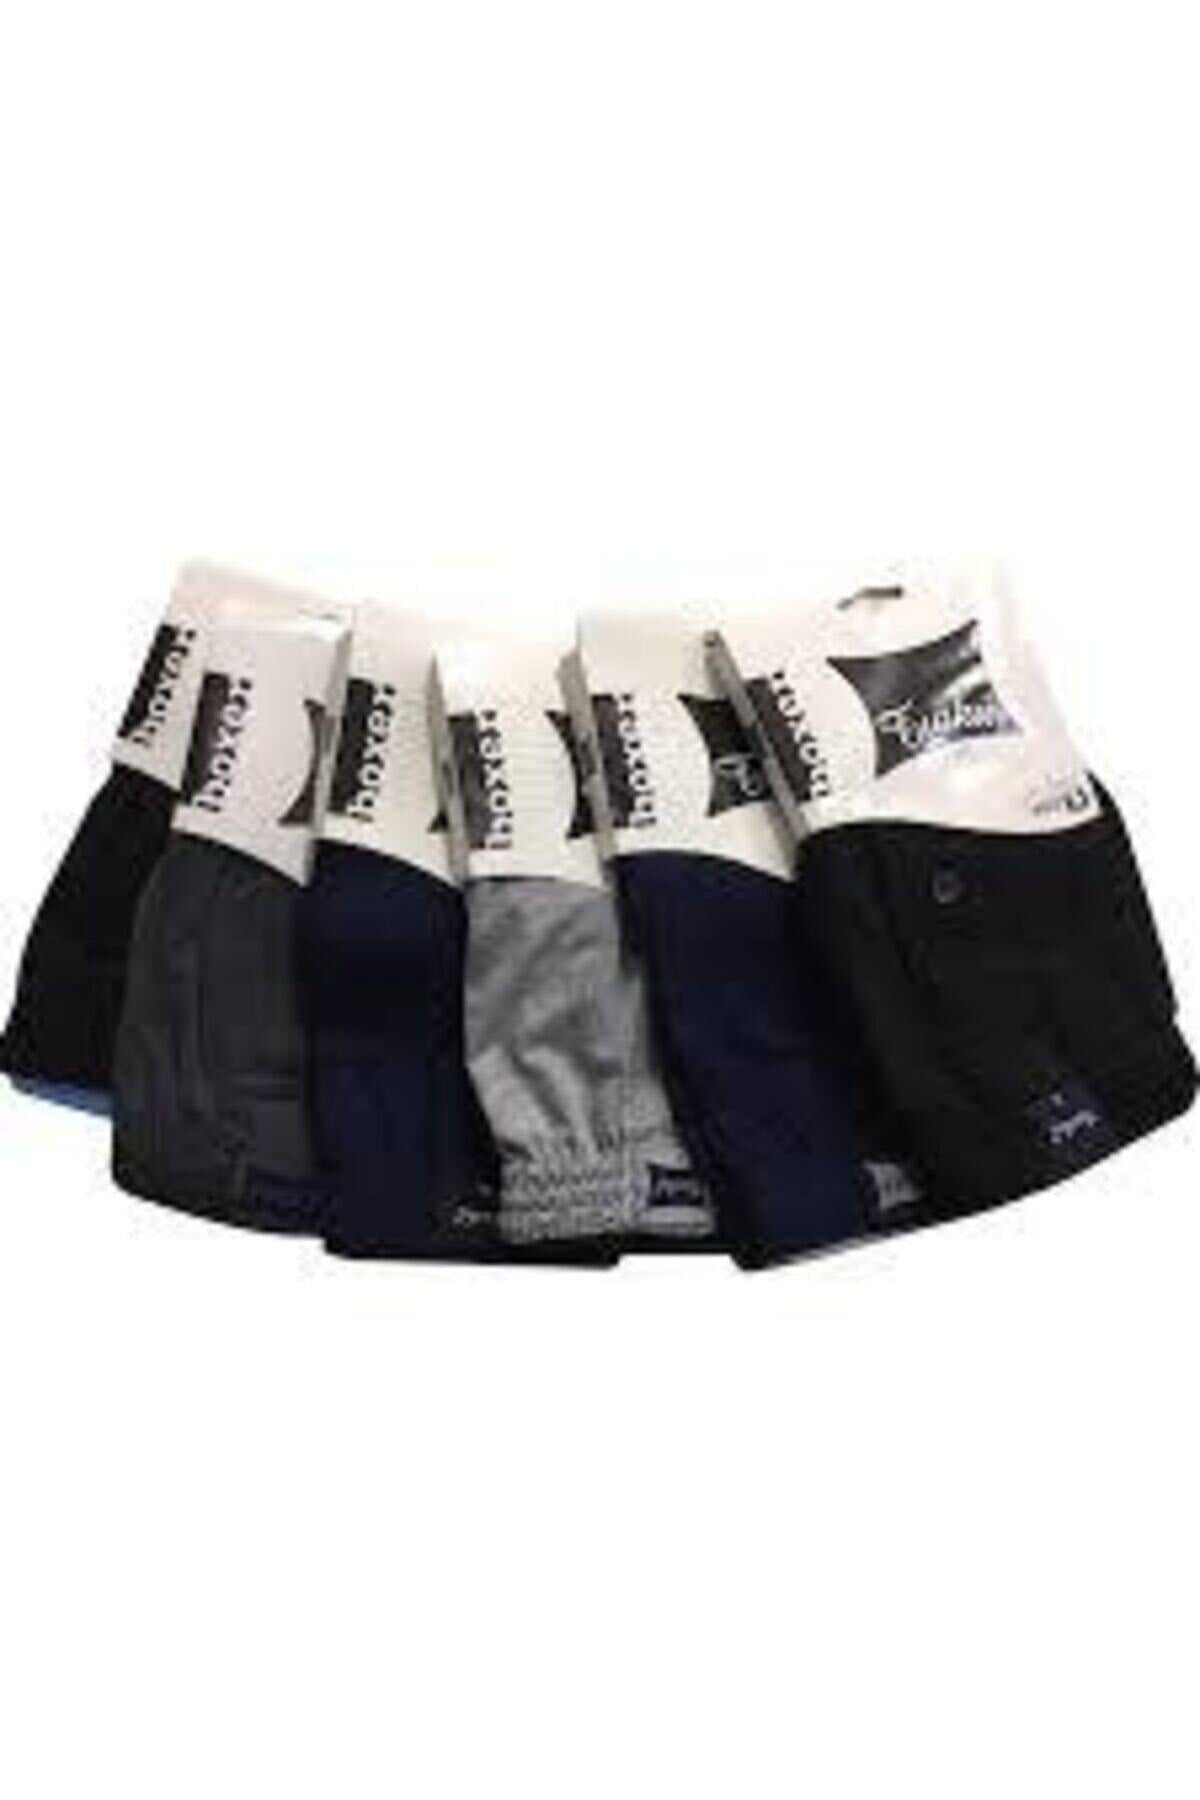 Men's Mixed Color 6 Pack Combed Buttoned Boxer